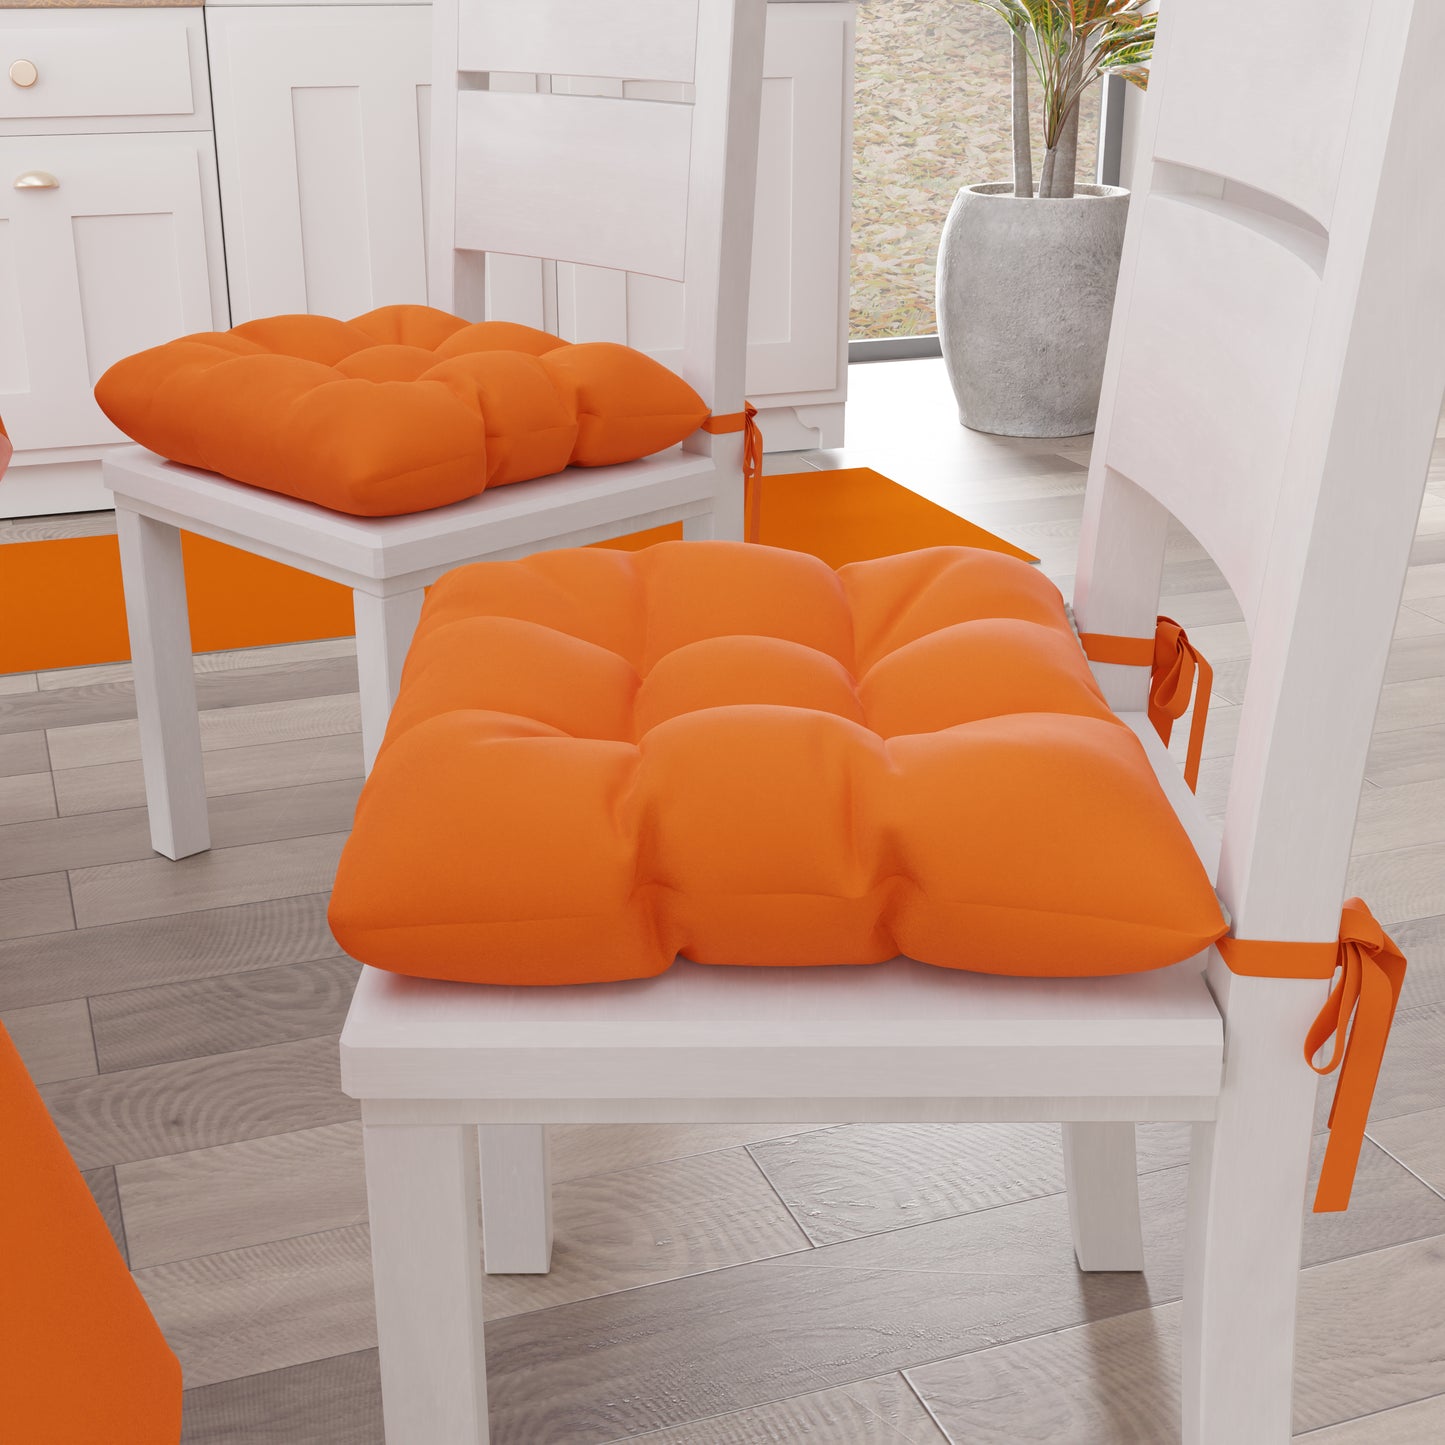 Kitchen Chair Cushions, Chair Covers 6 Pieces Orange